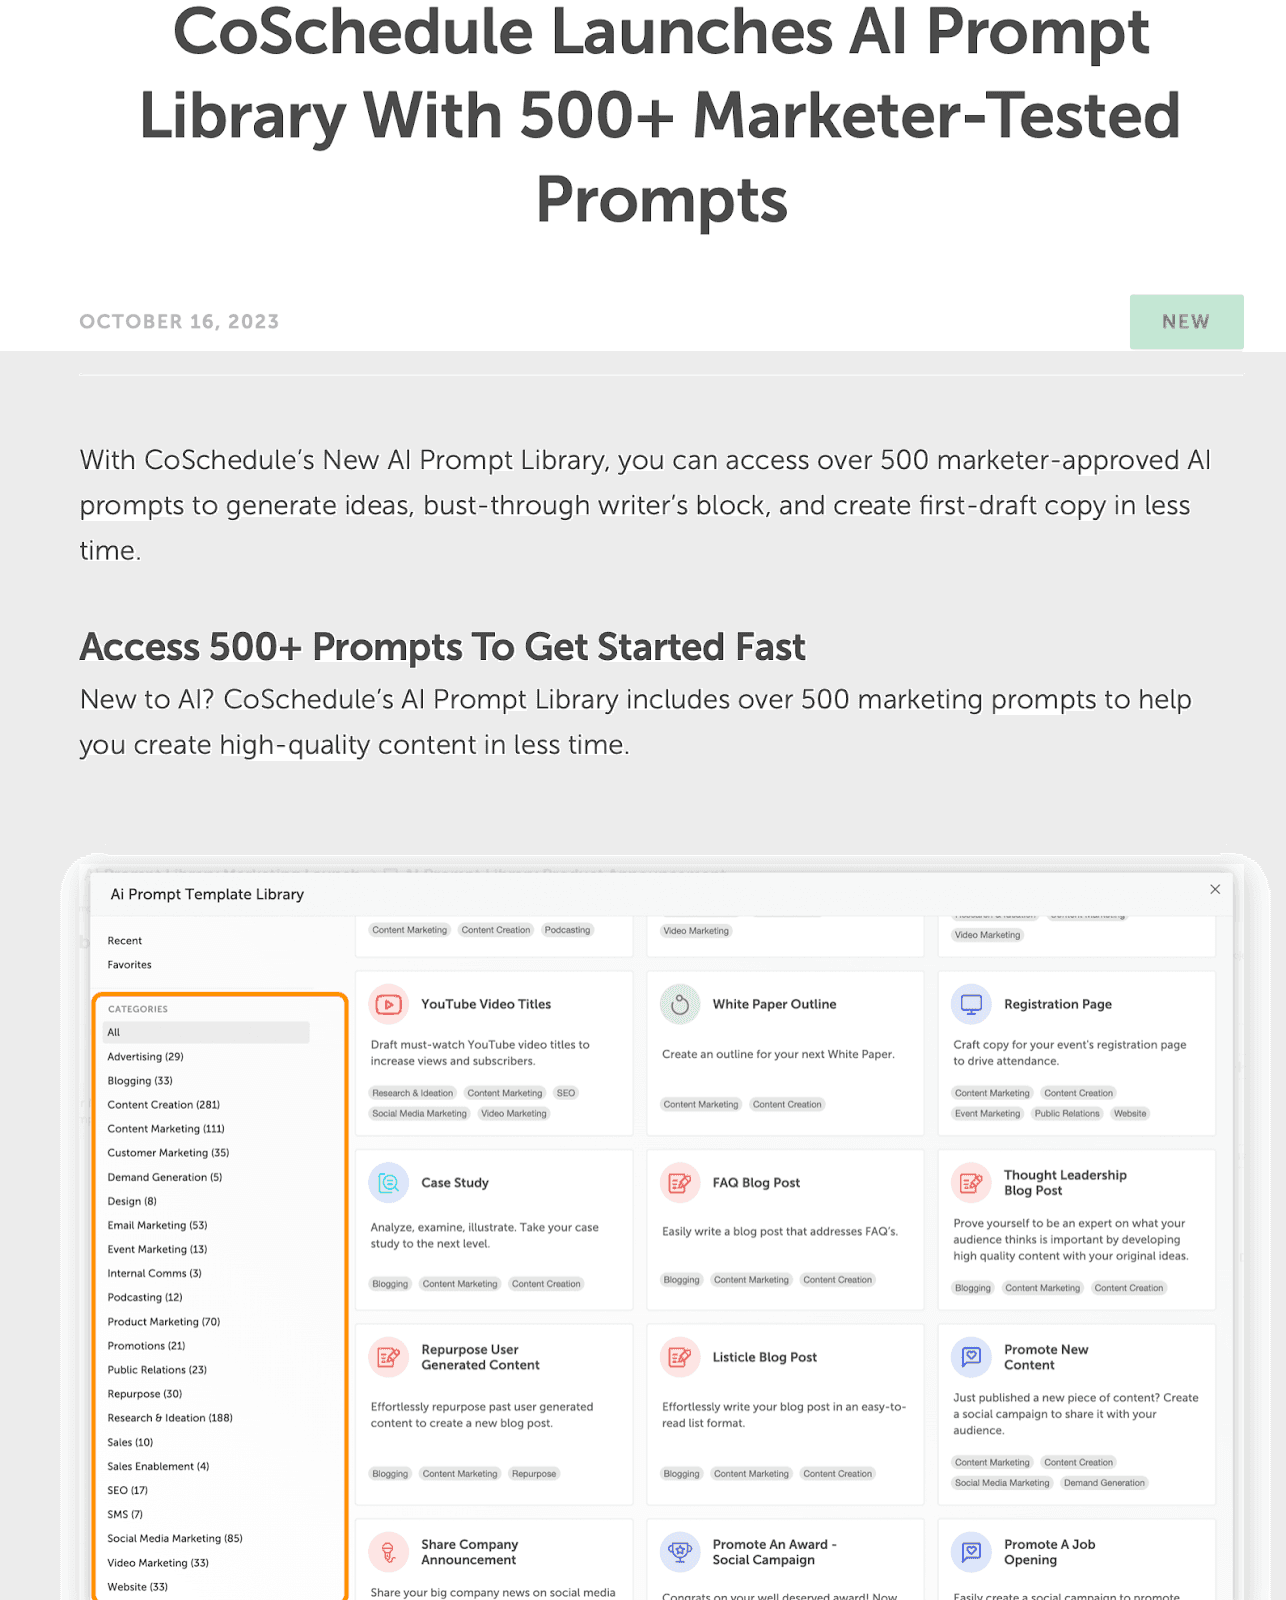 CoSchedule launches AI prompt library with 500+ marketer-tested prompts